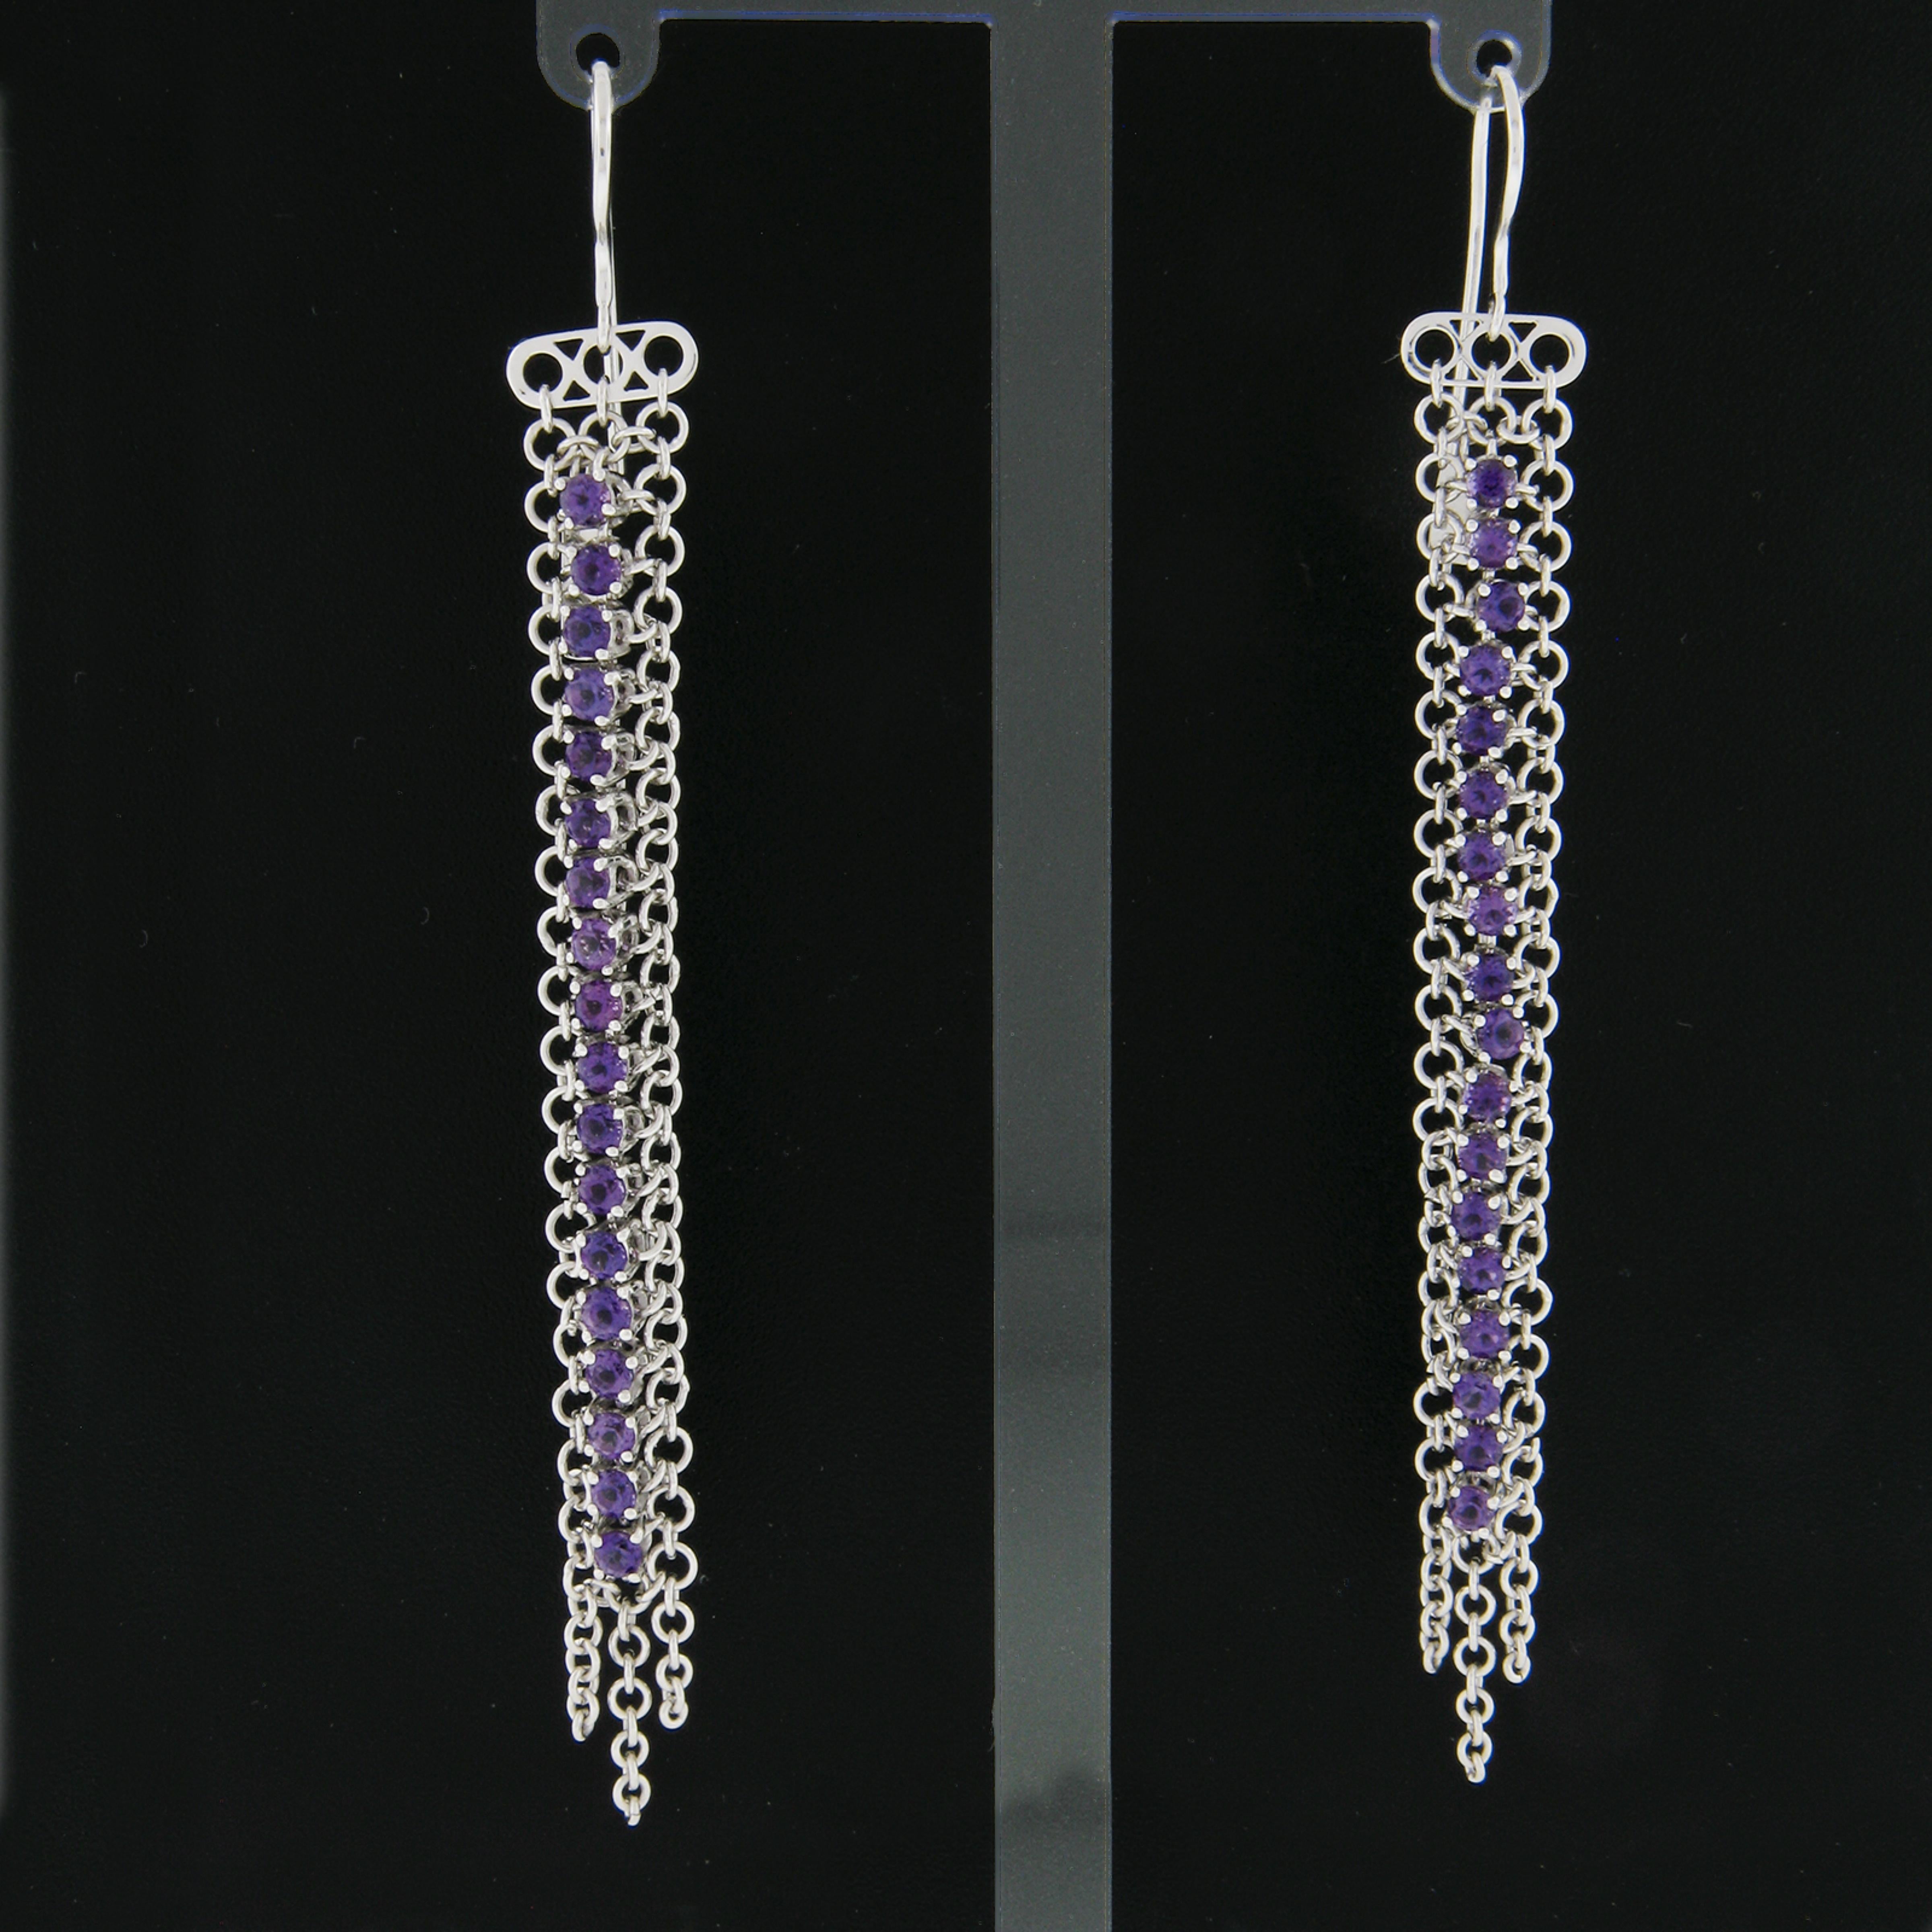 Here we have an Italian stylish pair of long drop dangle hook earrings crafted in solid 18k white gold. They each feature a cable link chain adorned with natural  amethyst, that beautifully sits at the center of the design. The stones have a very